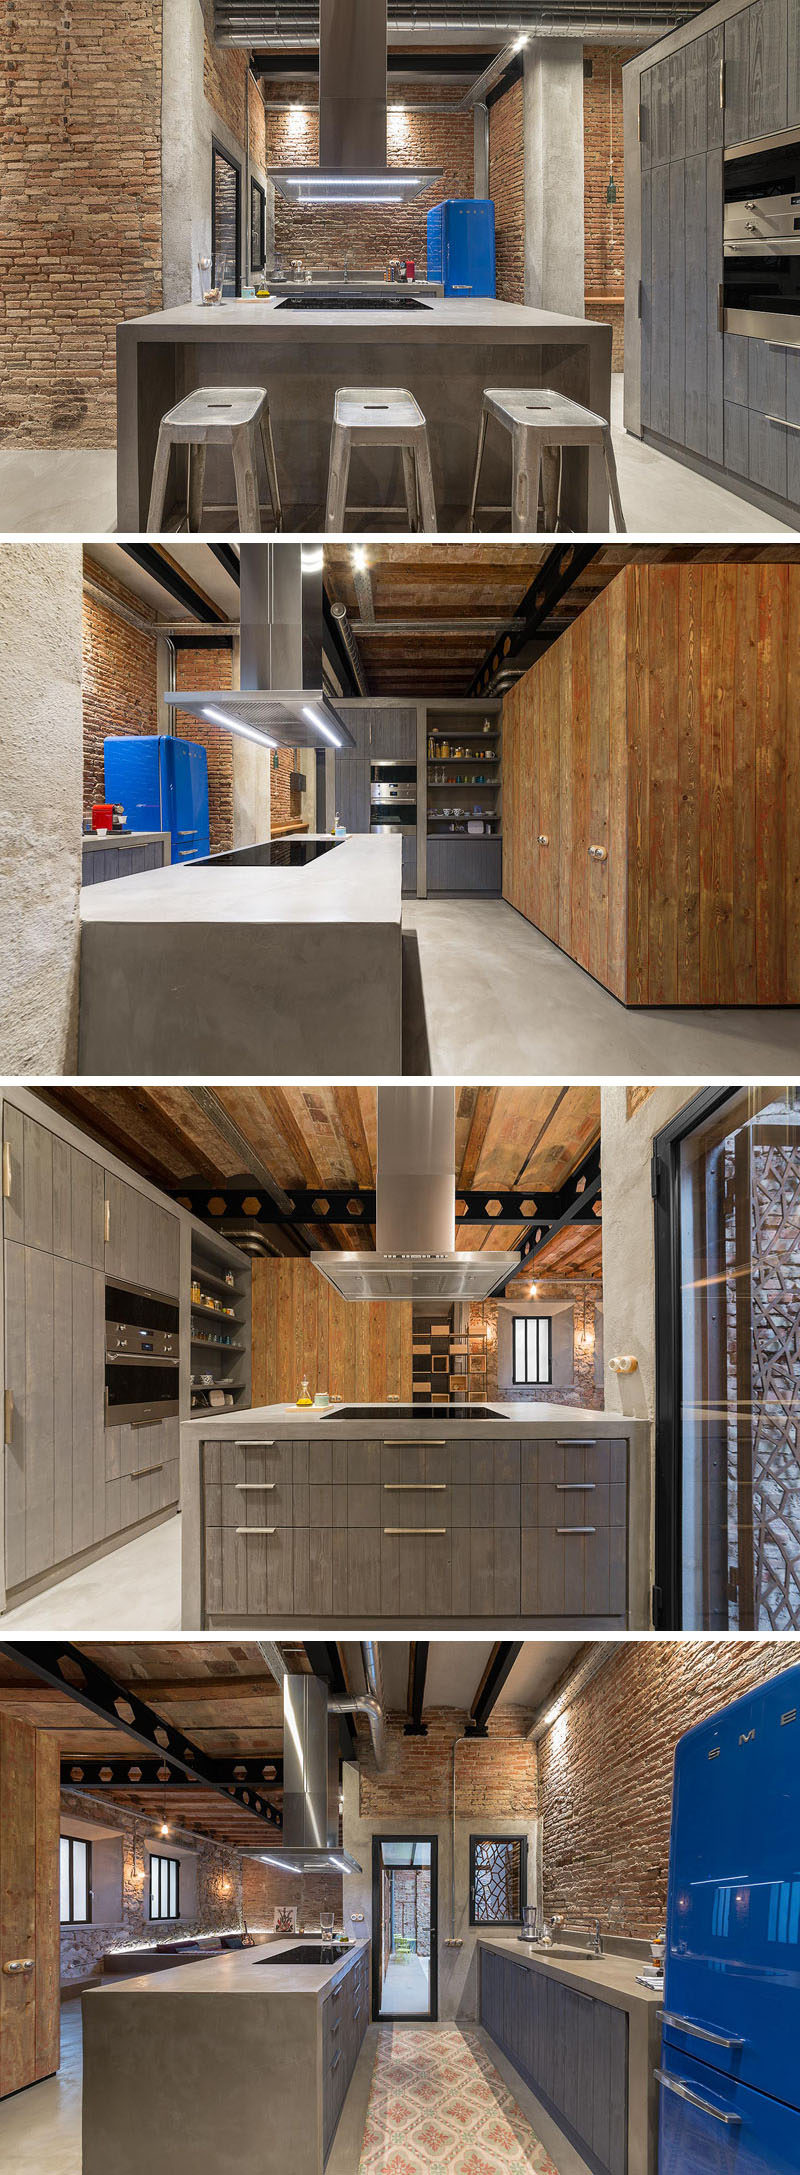 In this kitchen, a large central island provides plenty of counter space, and light gray wood has been paired with concrete to create a contemporary look.